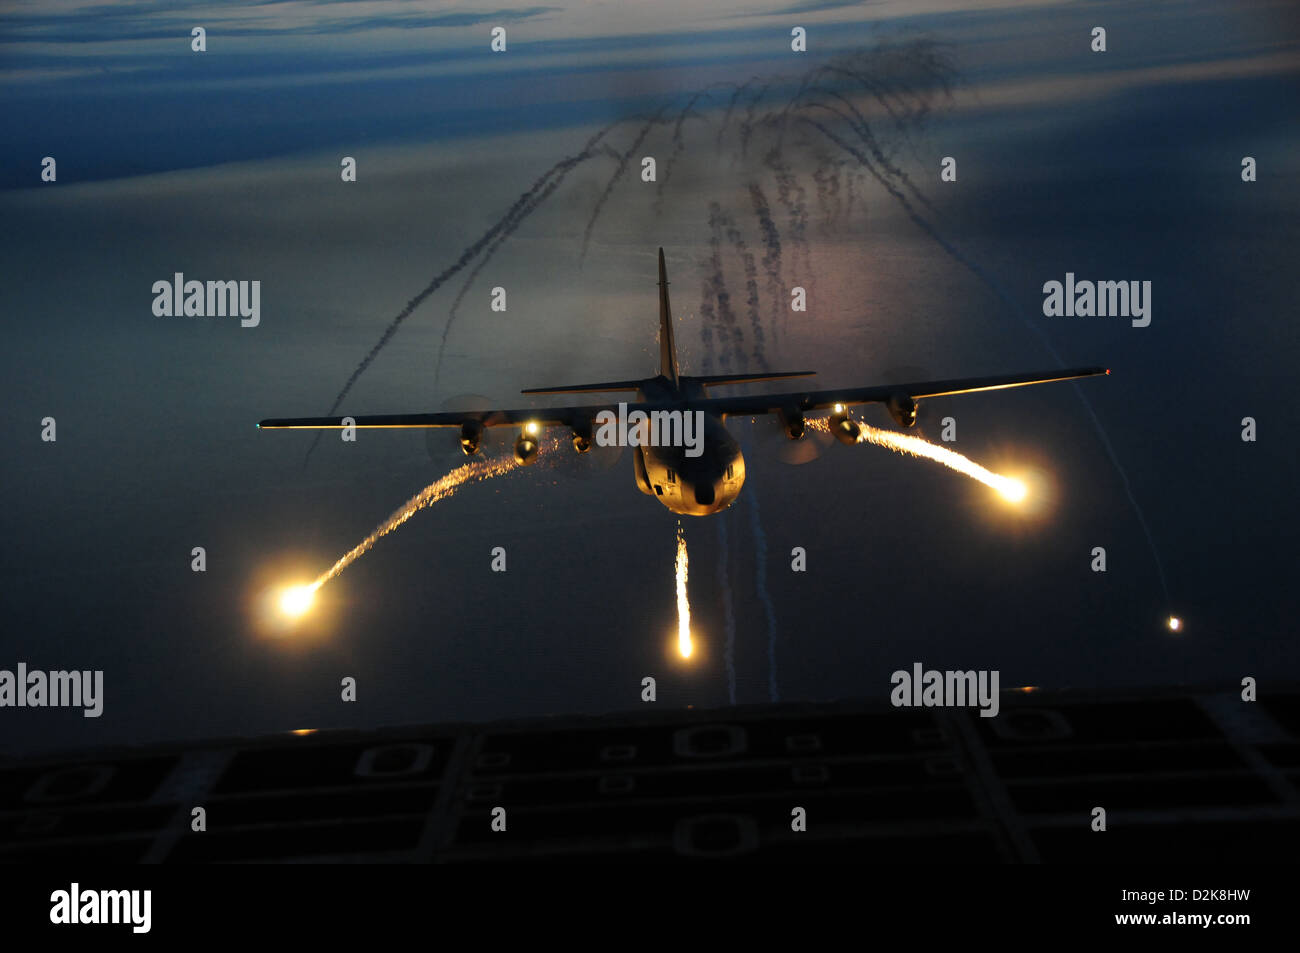 A C-130 night training mission uses live flares as an aerial infrared countermeasure used to defeat infrared homing (heat seeking) surface-to-air or air-to-air missiles Sept. 25, 2012 around Niagara Falls, New York. Stock Photo